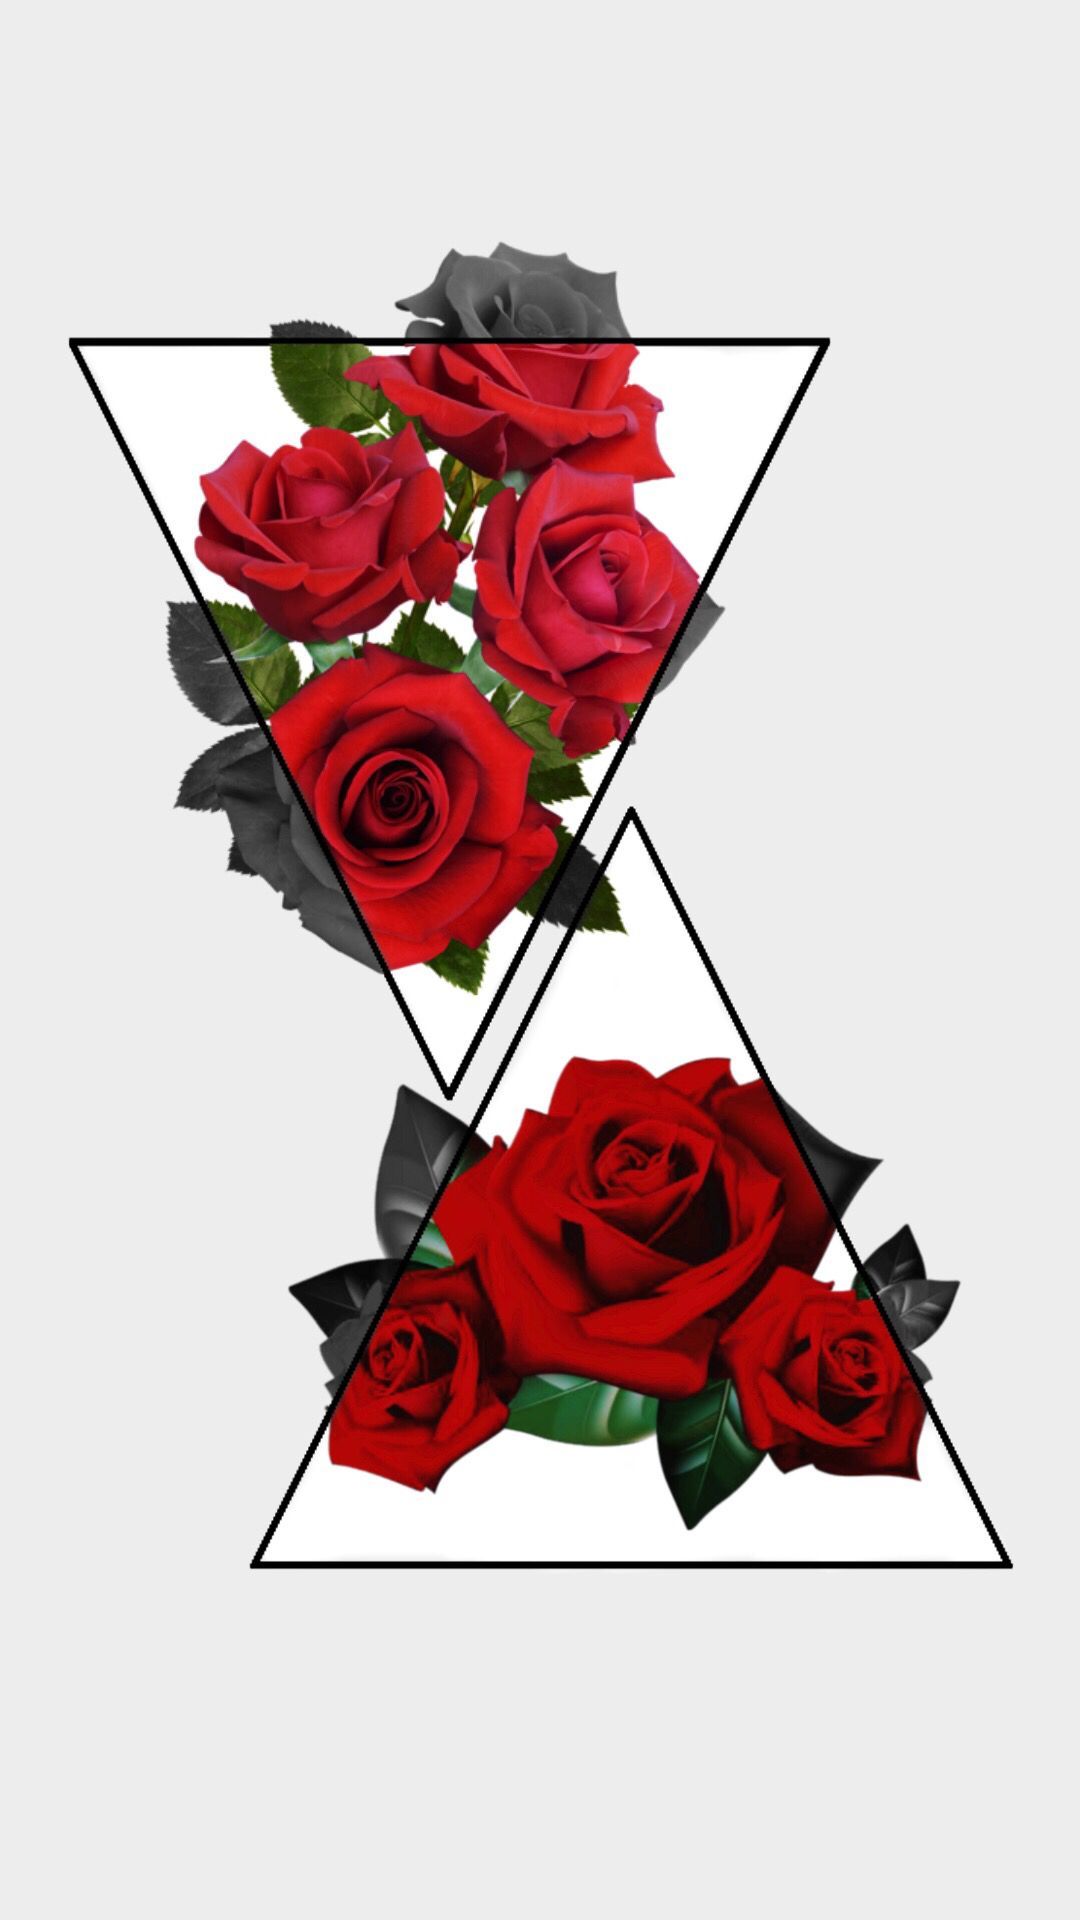 A triangular shape with red roses on it - Roses